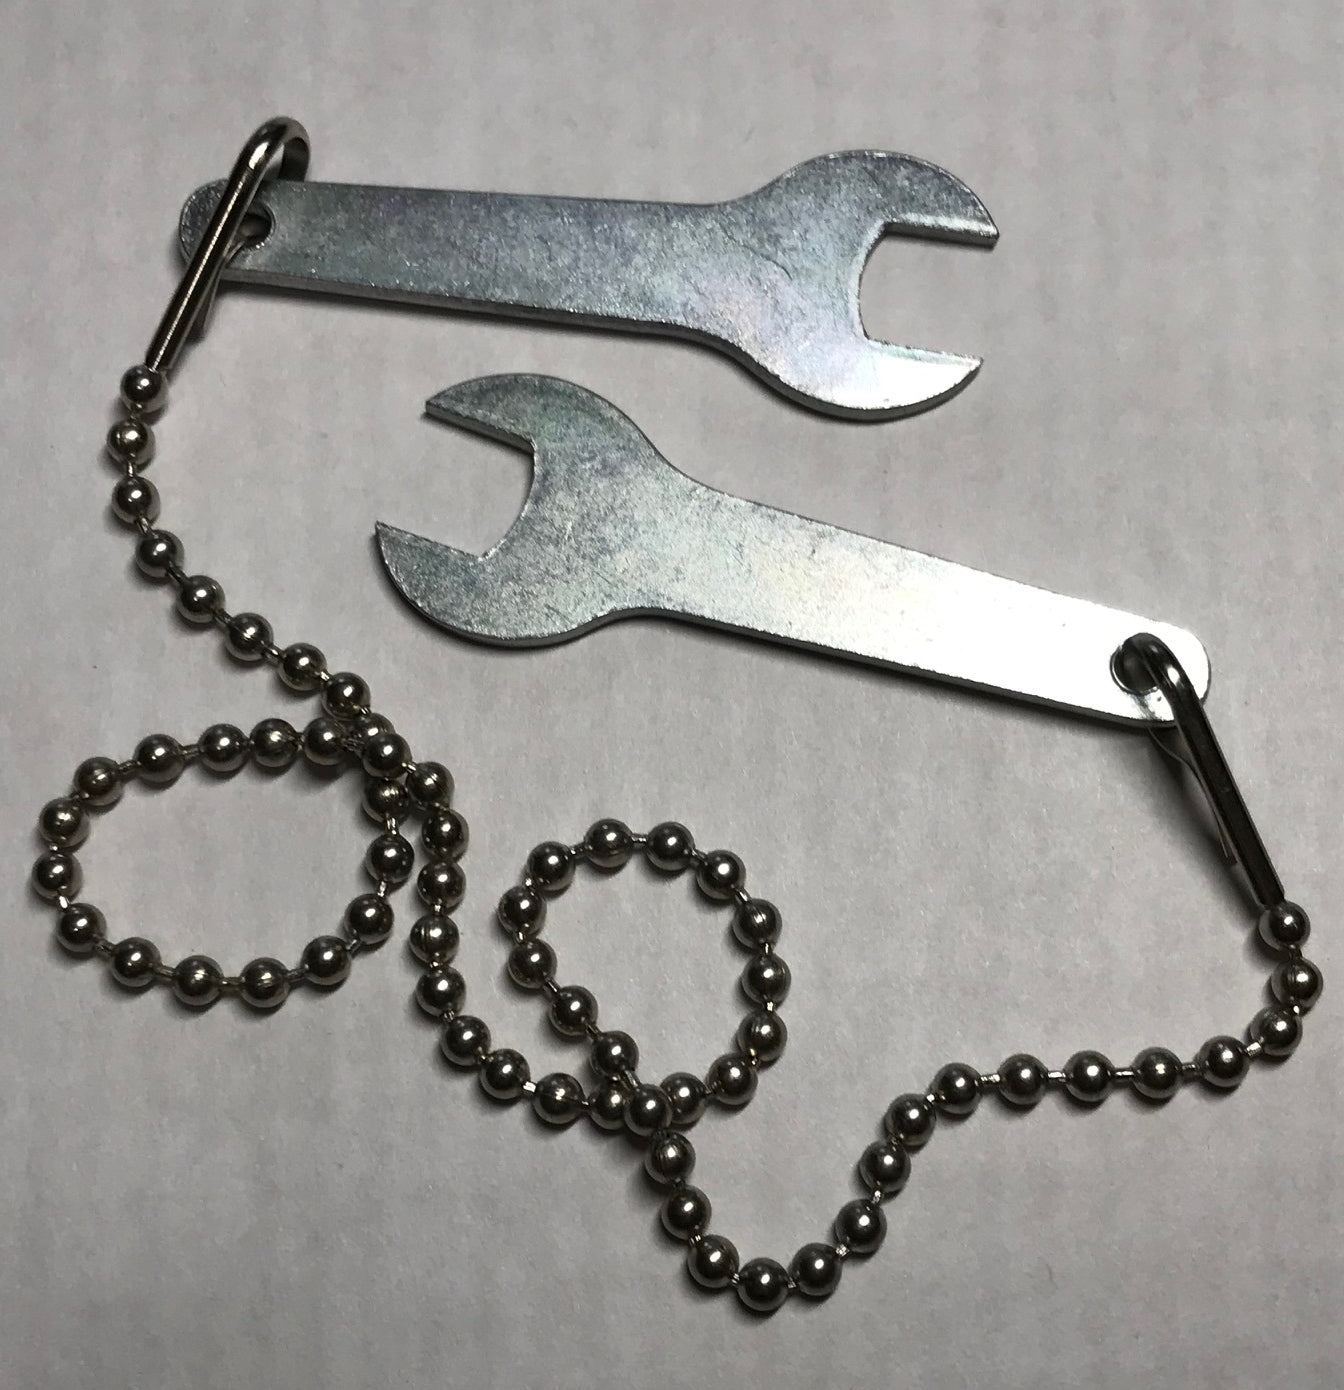 Foredom Open End Wrench, HP#8 & 8D Blackstone Ind. Bigfoot Carving Tools, LLC